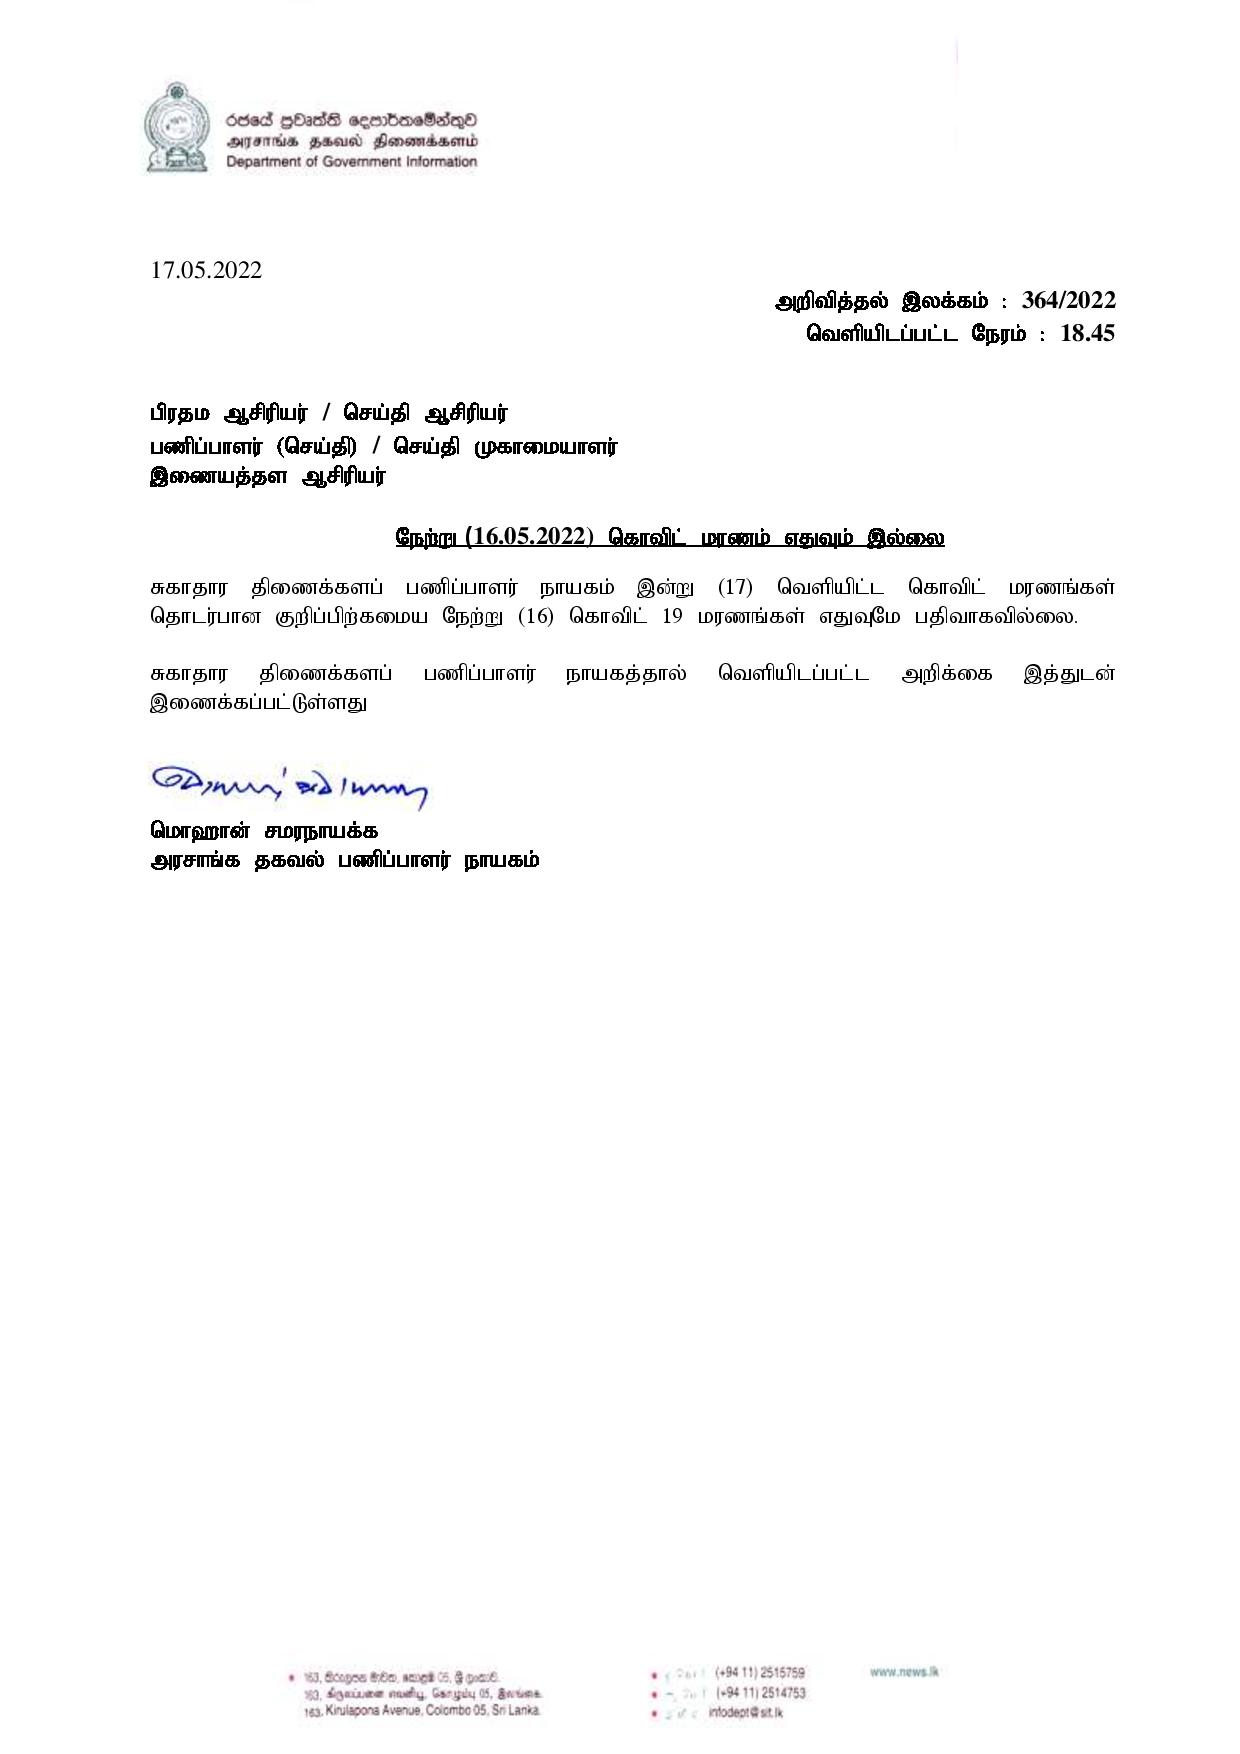 Press Release 364 Tamil page 001